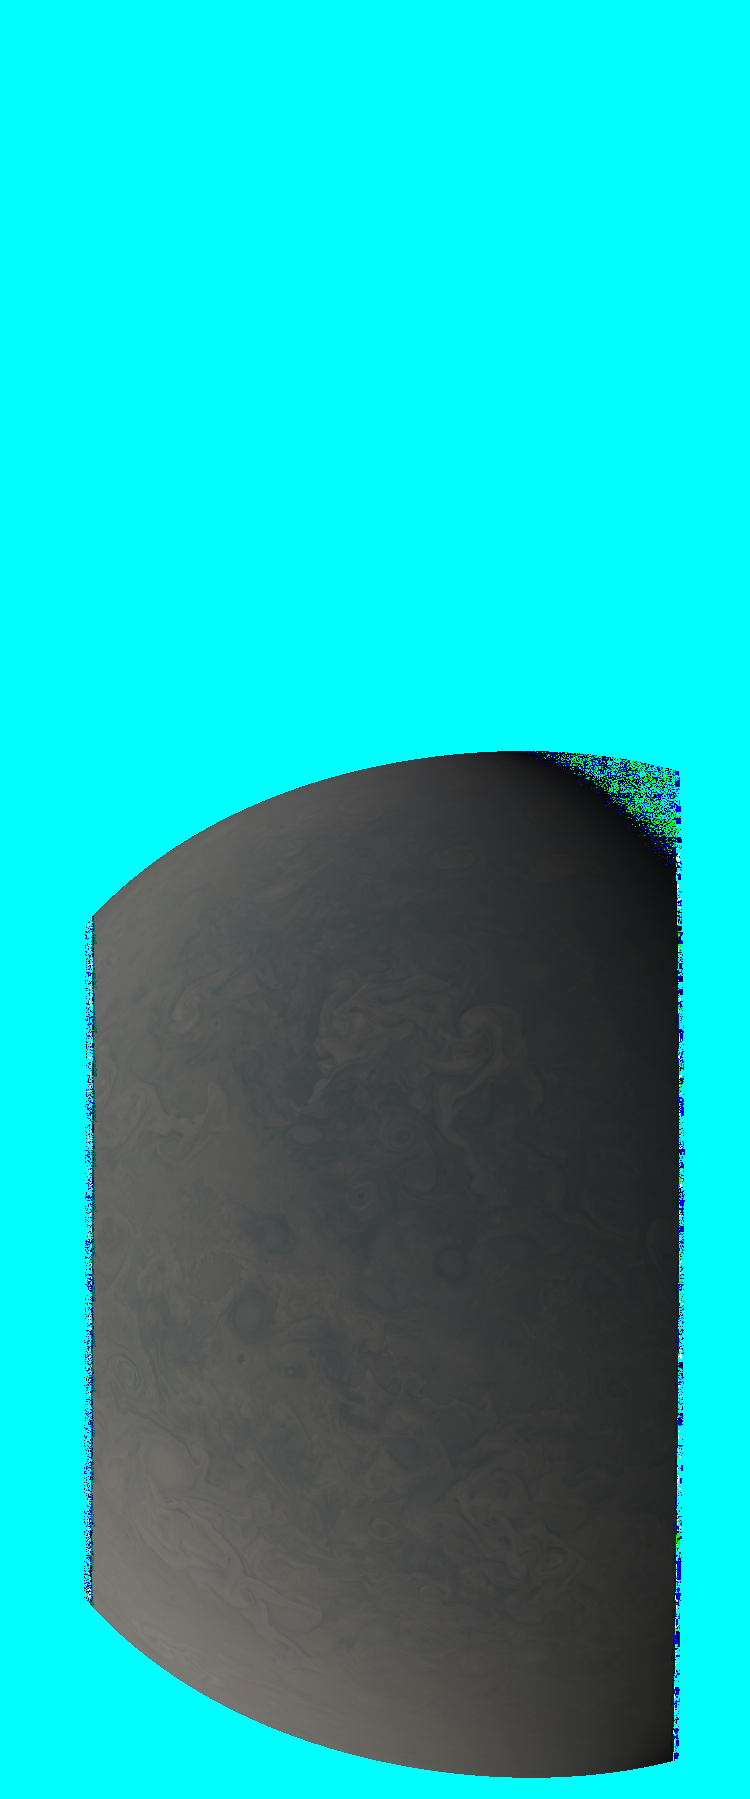 JNCE_2018250_15C00019_V01-raw.bmp_mask_10px_30.063000s_cx809.0_000000_decompanded.bmp_sphC_.png